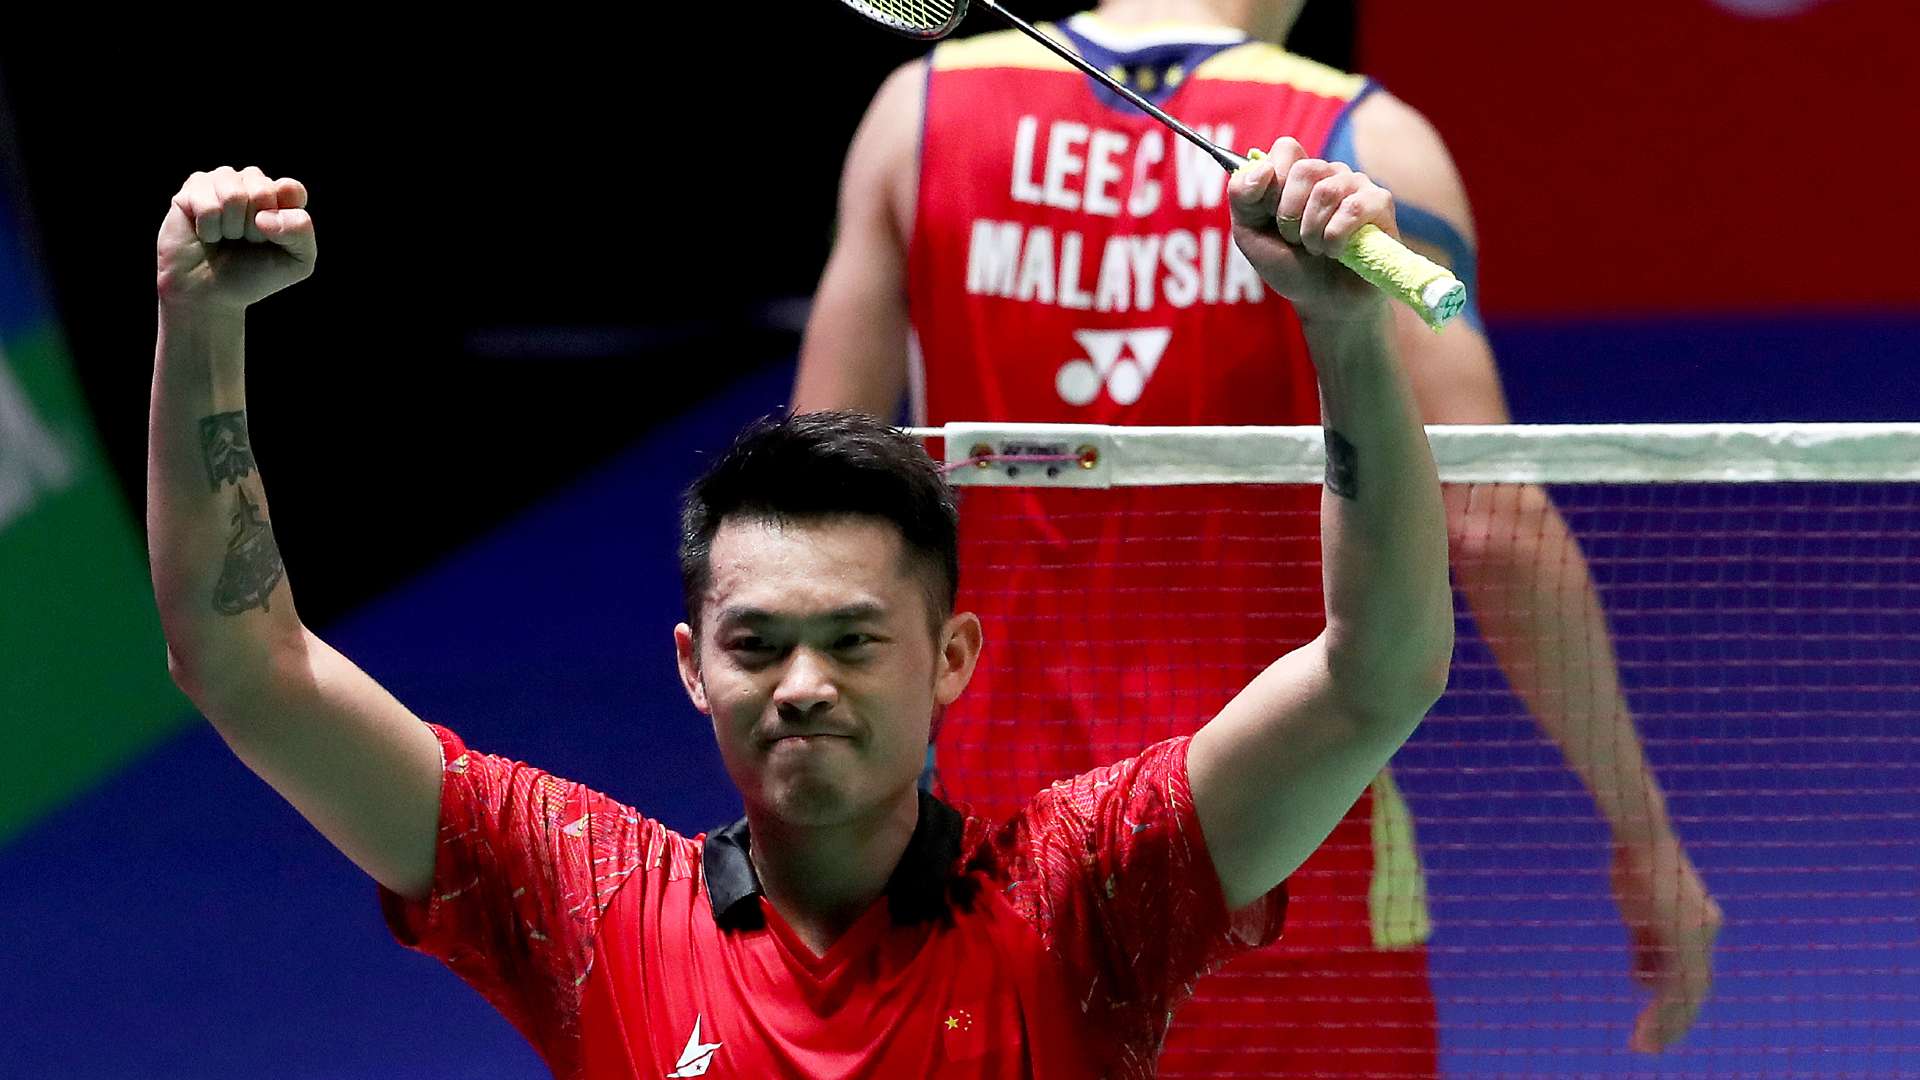 Lin Dan in a match against Lee Chong Wei (Image Credits - Twitter)